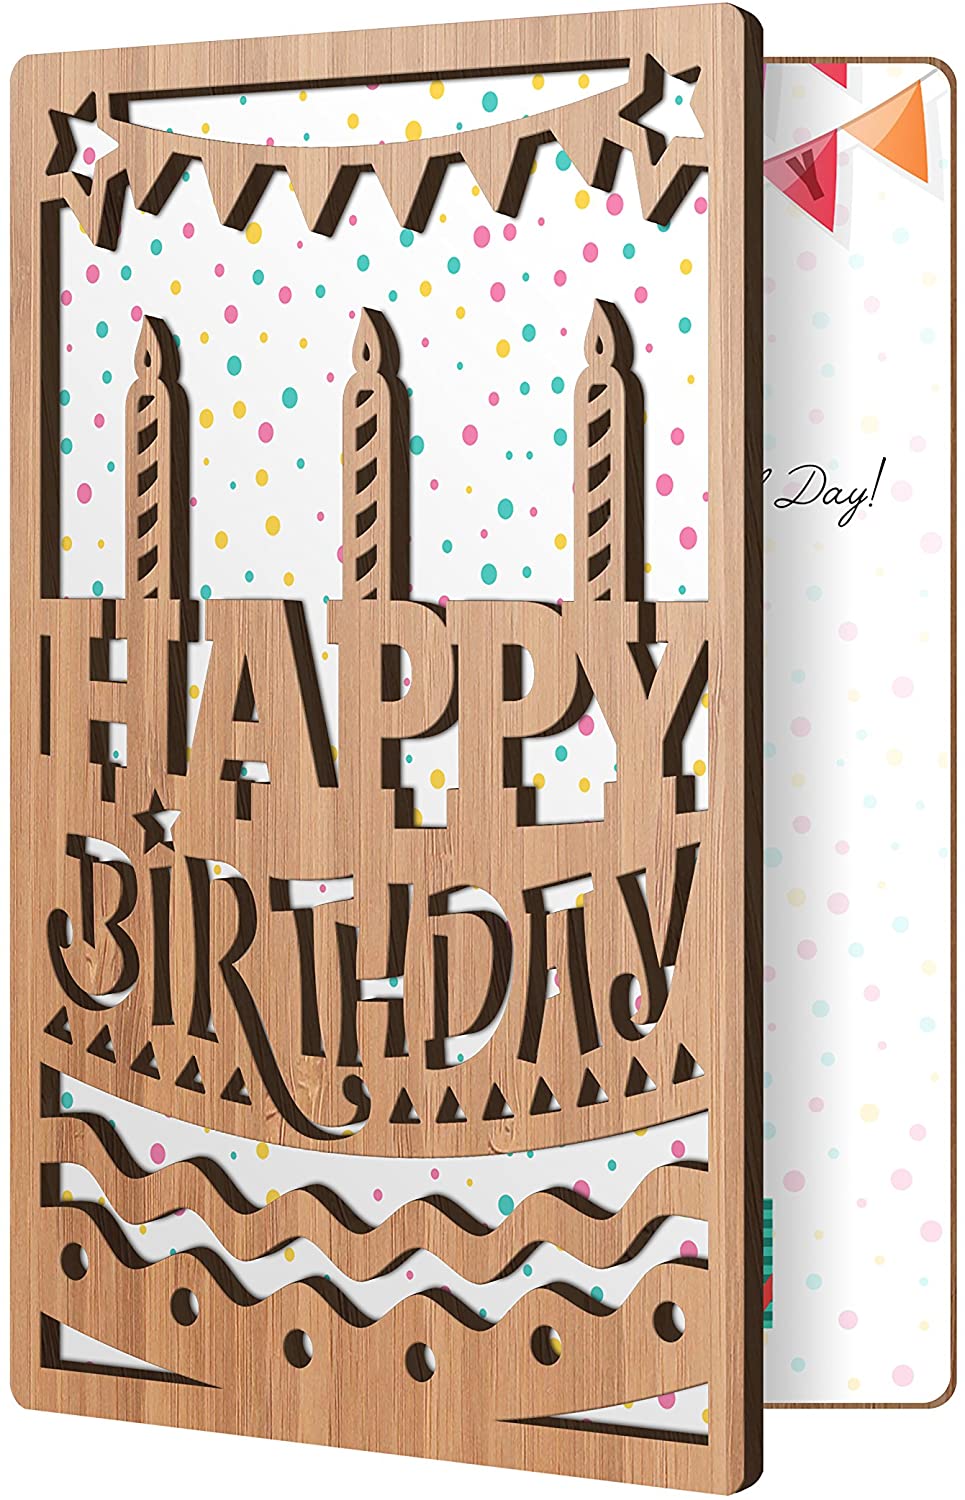 Happy Birthday Card: Bamboo Wood Greeting Card with Happy B Day Cake & Candles Design, Premium Handmade Wooden Card Perfect for Sending Birthday Wishes